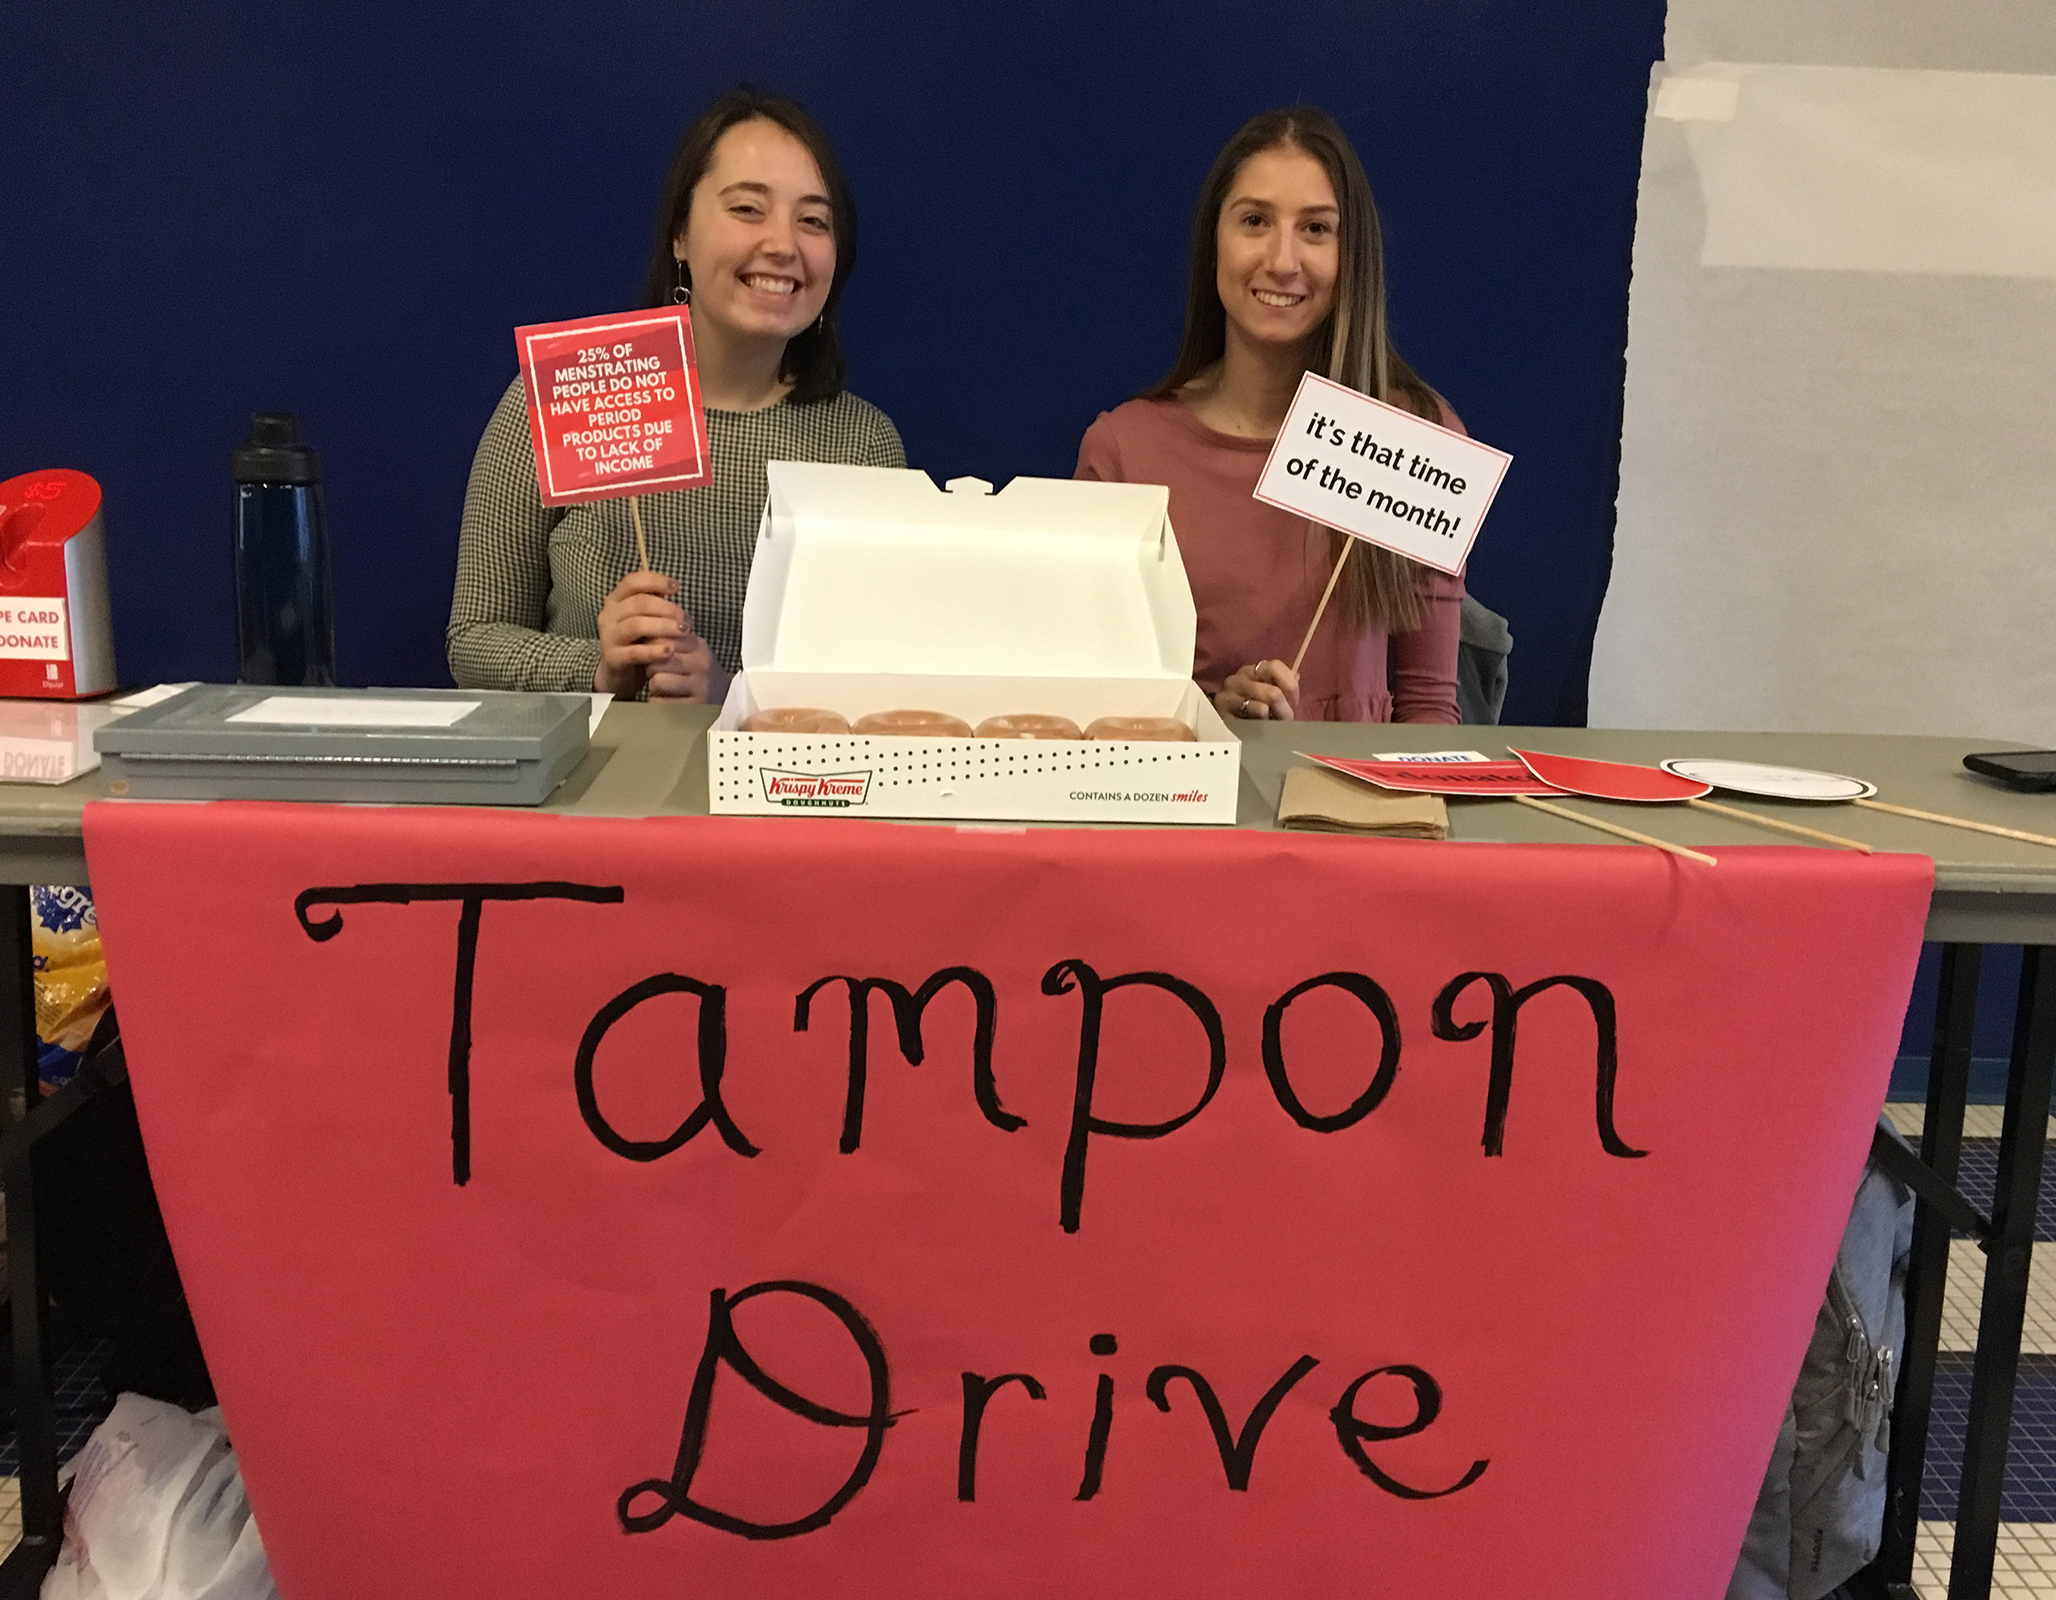 The Period Drive. Donate a Sanitary Pad., please donate 